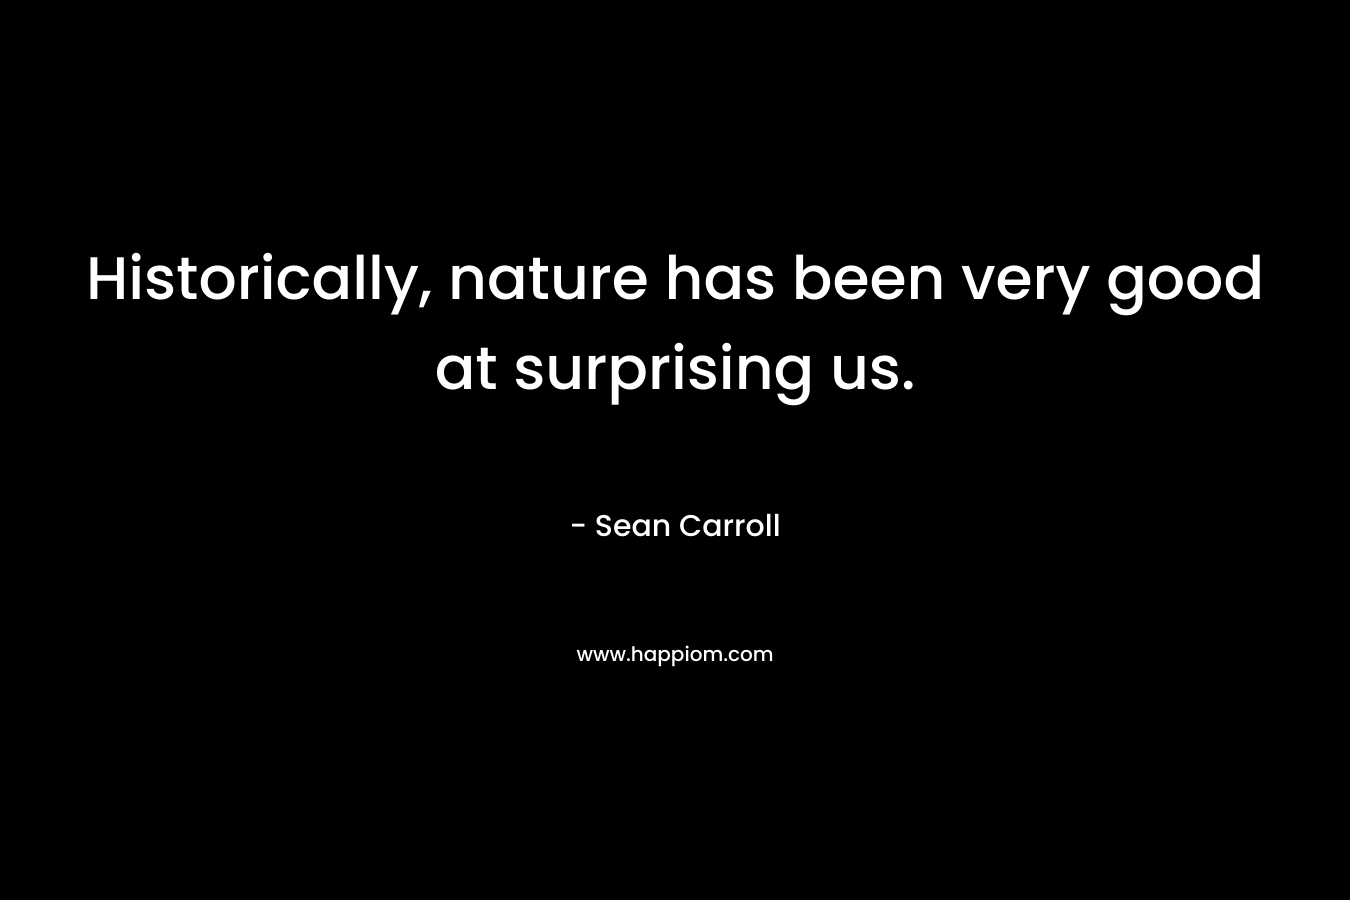 Historically, nature has been very good at surprising us.